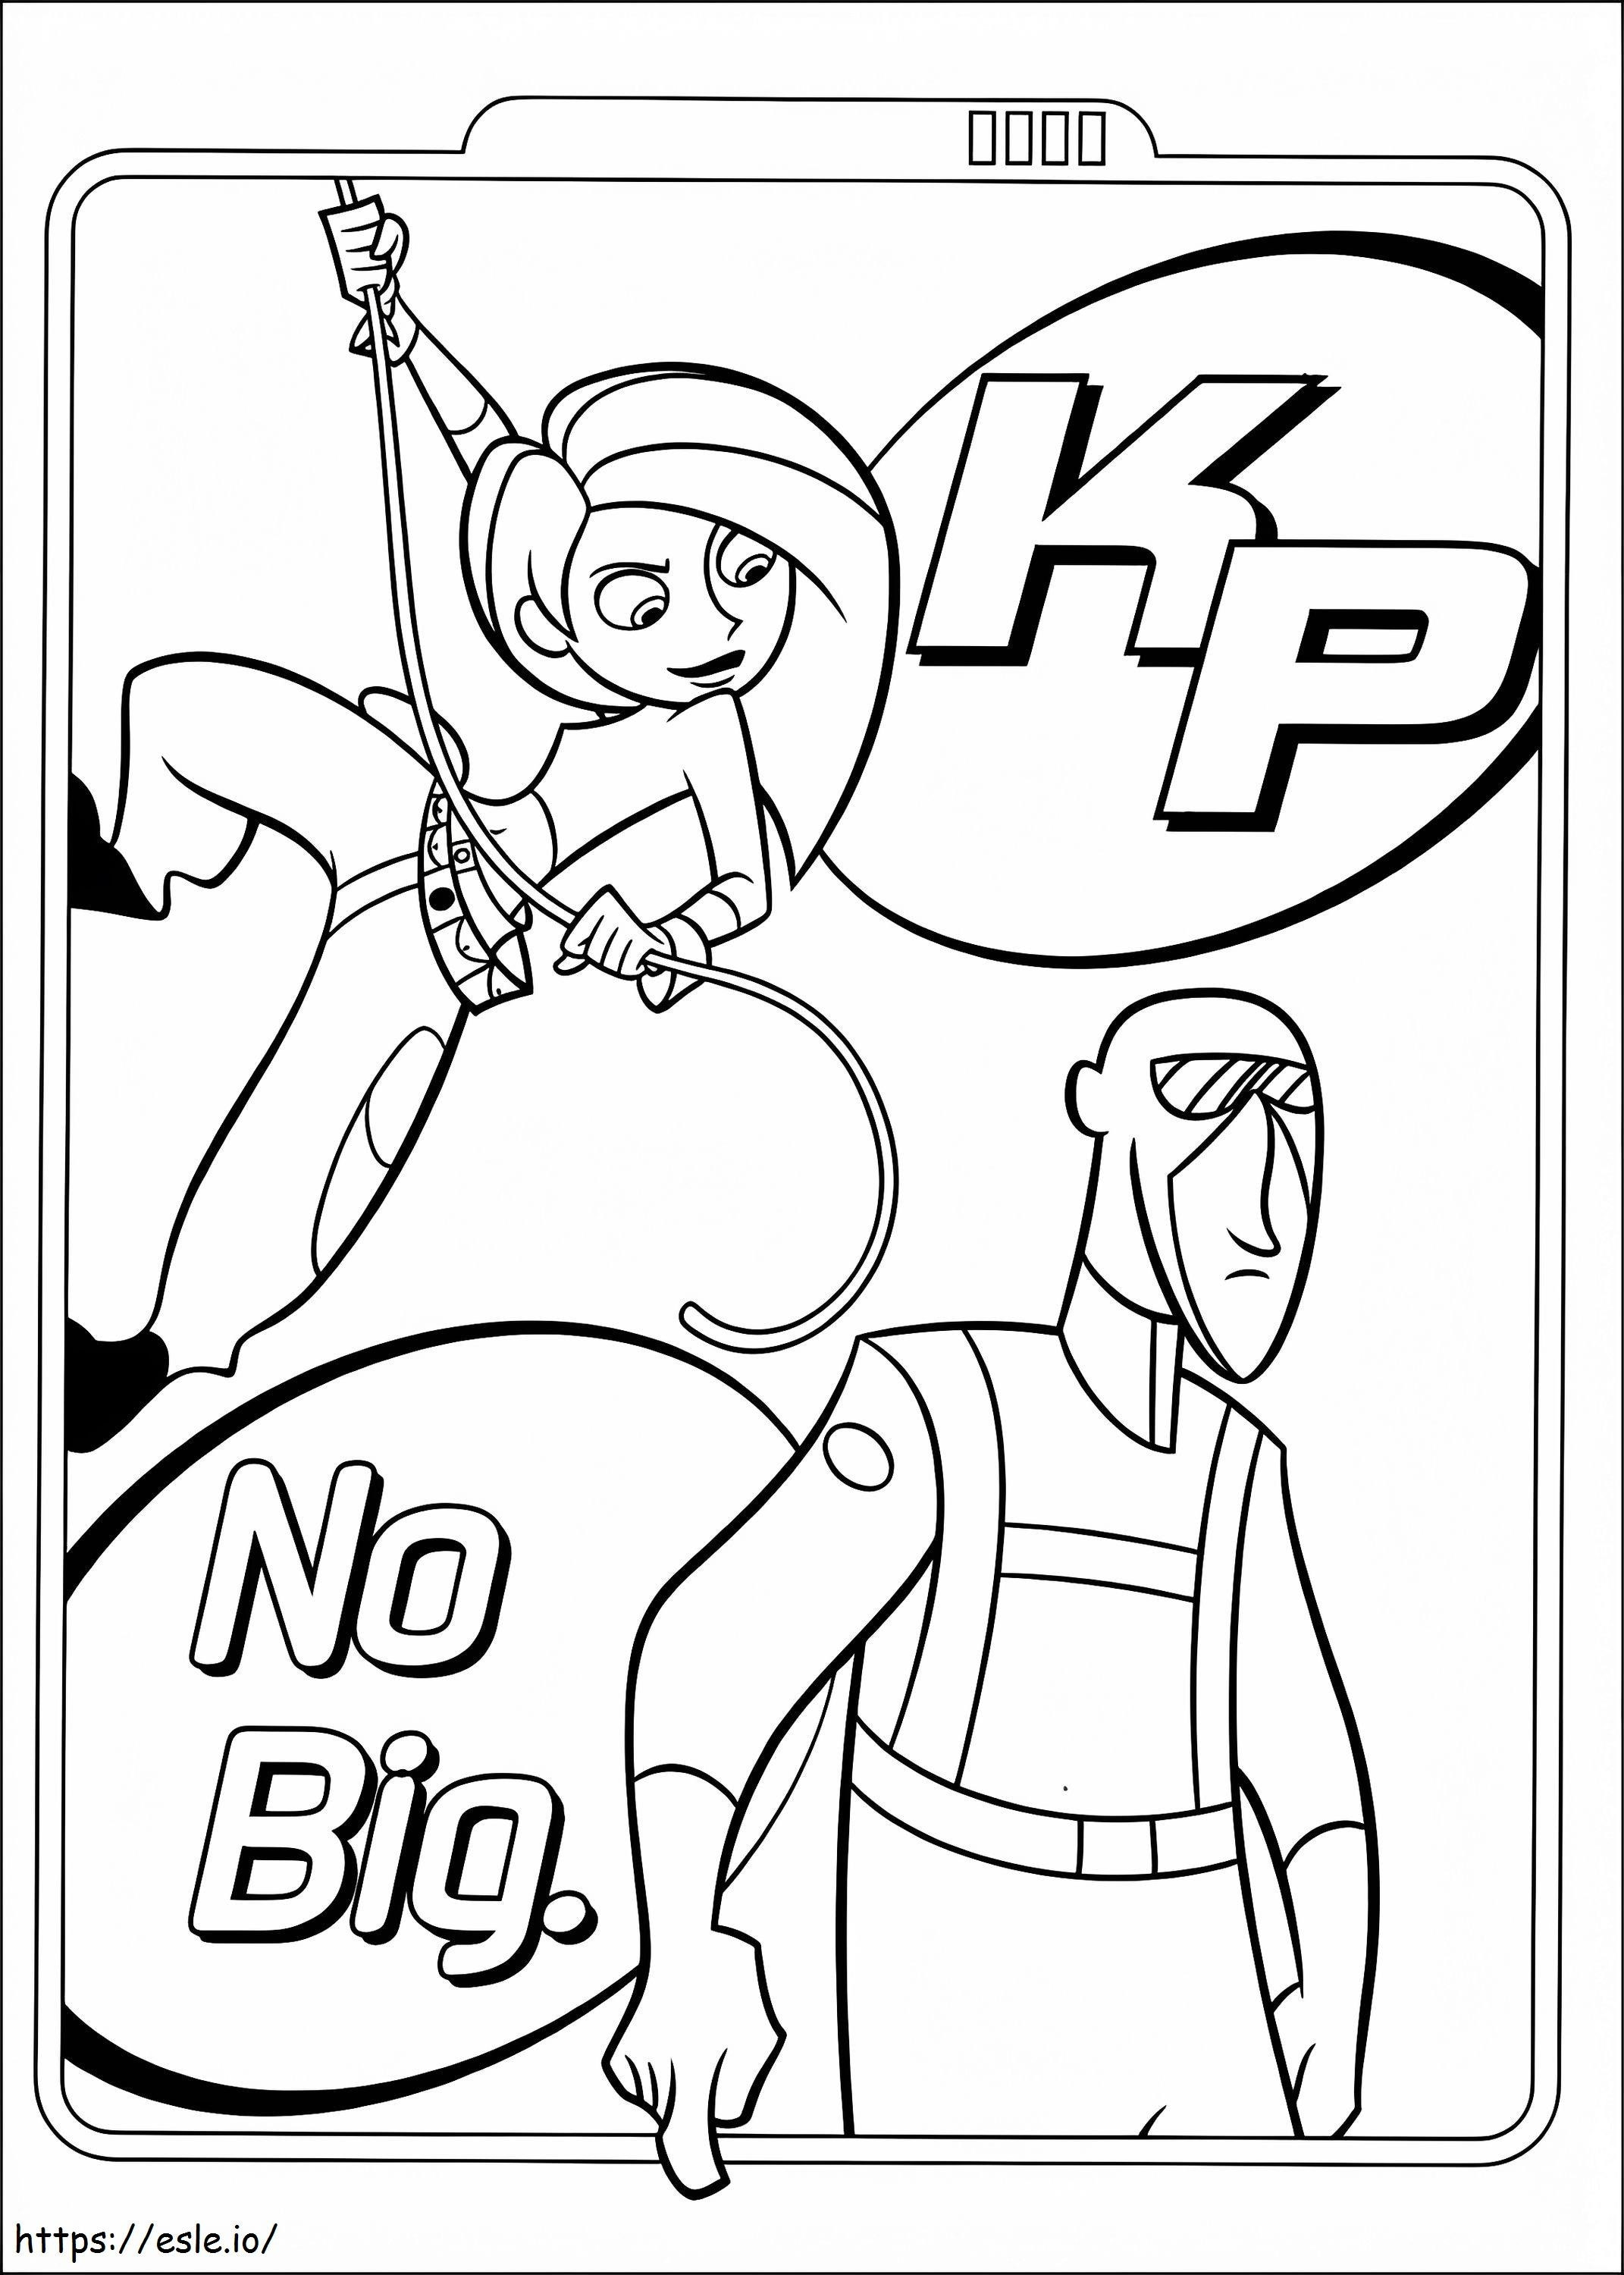 1534471390 Kim Possible In Fighting A4 coloring page